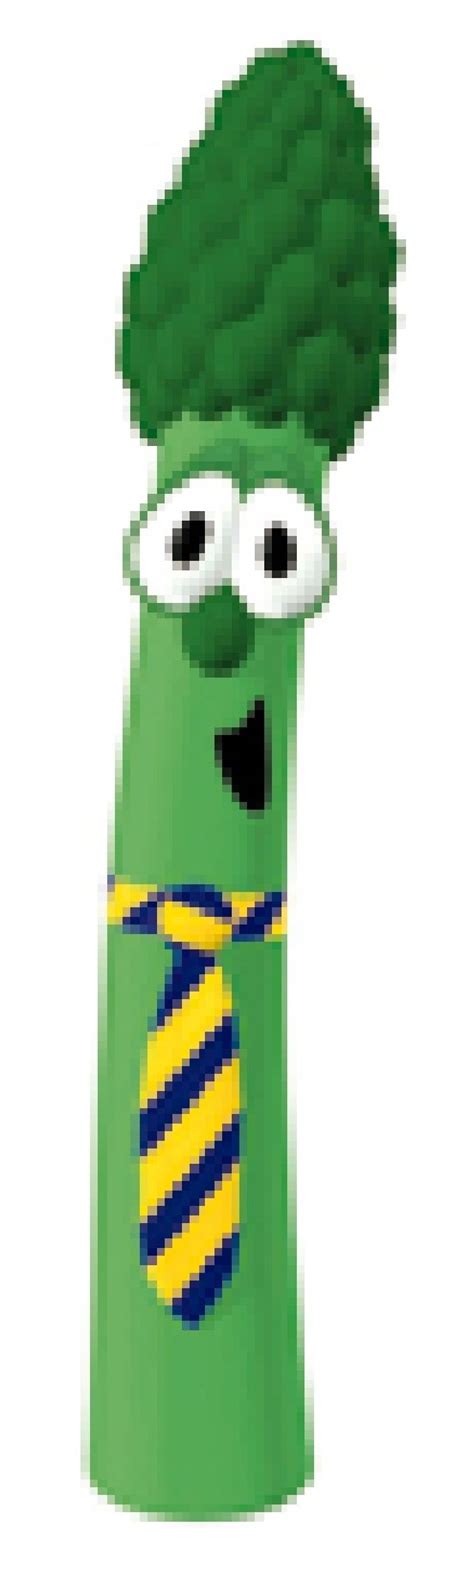 Mike asparagus. The VeggieTales Encyclopedia Wiki. Dan Anderson. Edit. Daniel "Dan" Anderson (born January 25, 1954 in Chicago, Illinois) was the voice actor of Mike Asparagus since 1993. Categories. Community content is available under CC-BY-SA unless otherwise noted. 